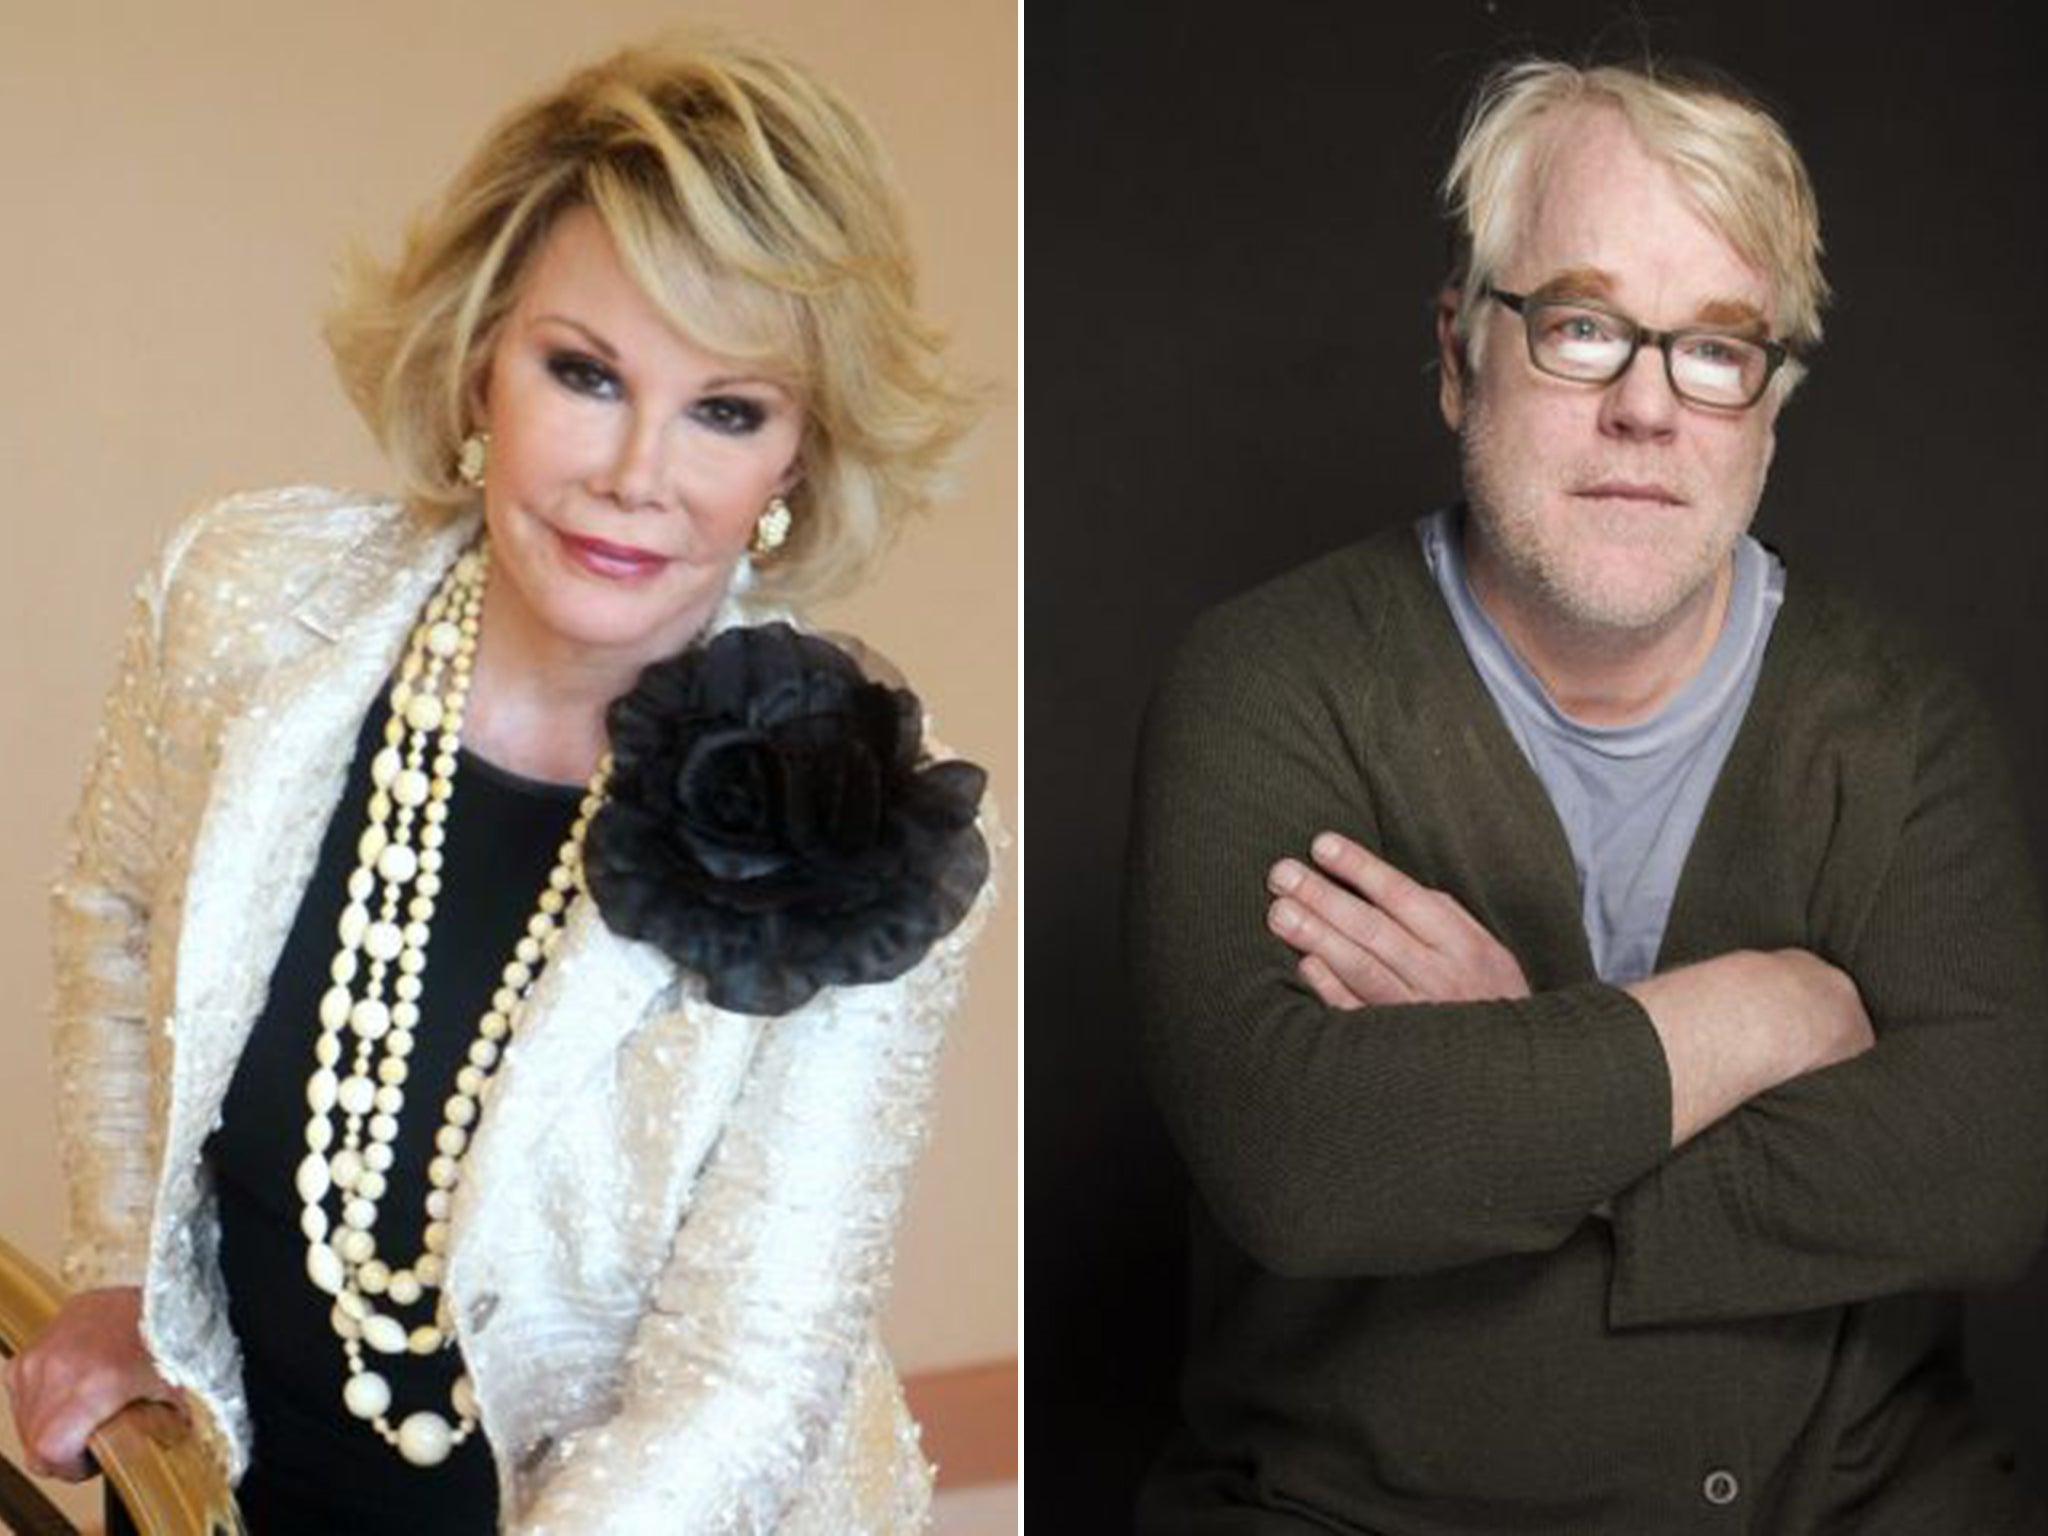 Joan Rivers died in September after experiencing complications following throat surgery; Philip Seymour Hoffman died from acute drug intoxication at his New York apartment in February